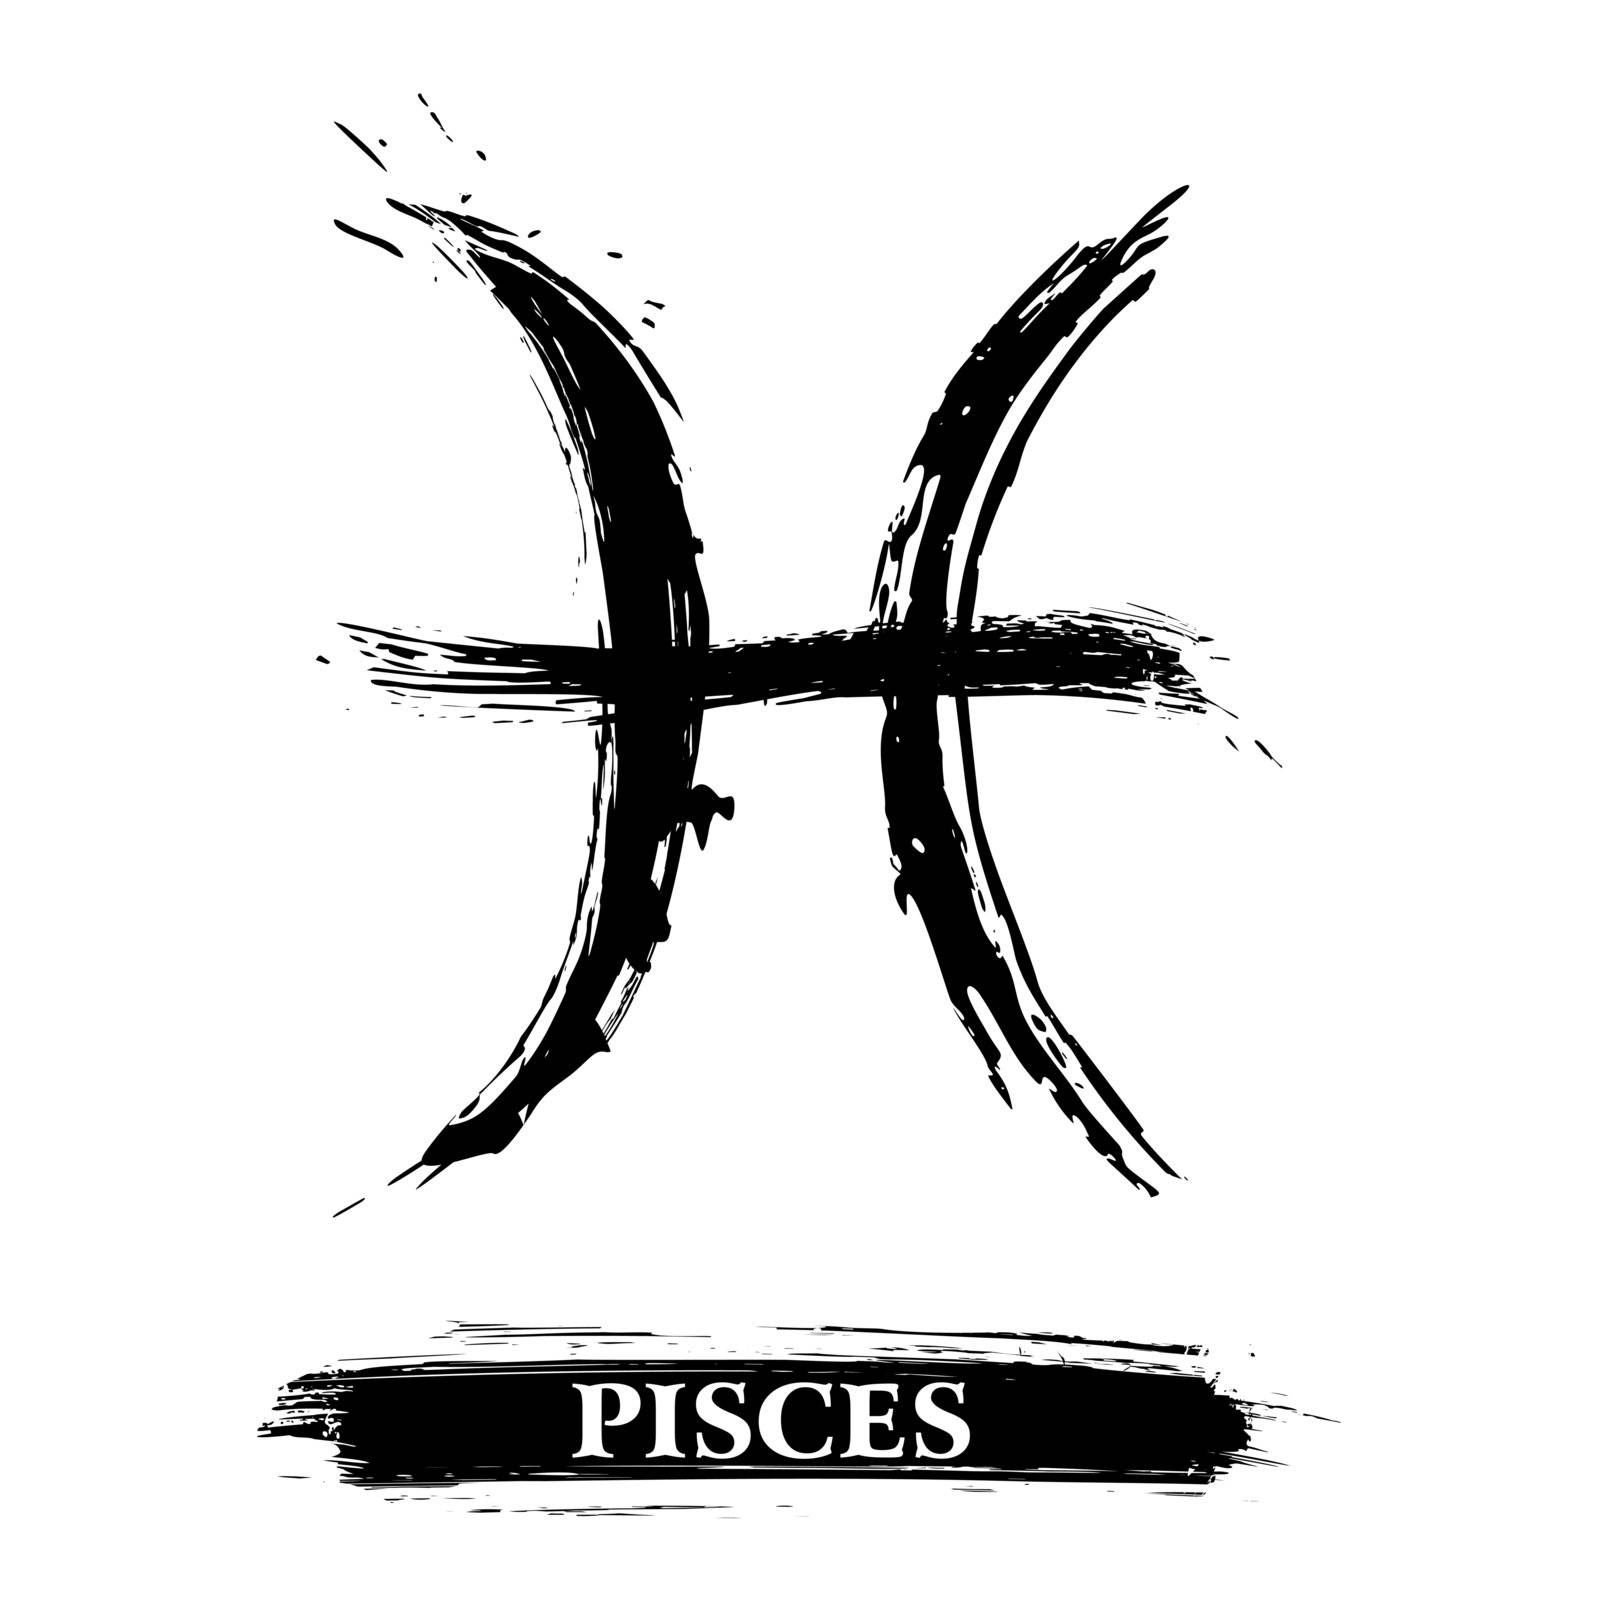 Zodiac sign Pisces created in grunge style